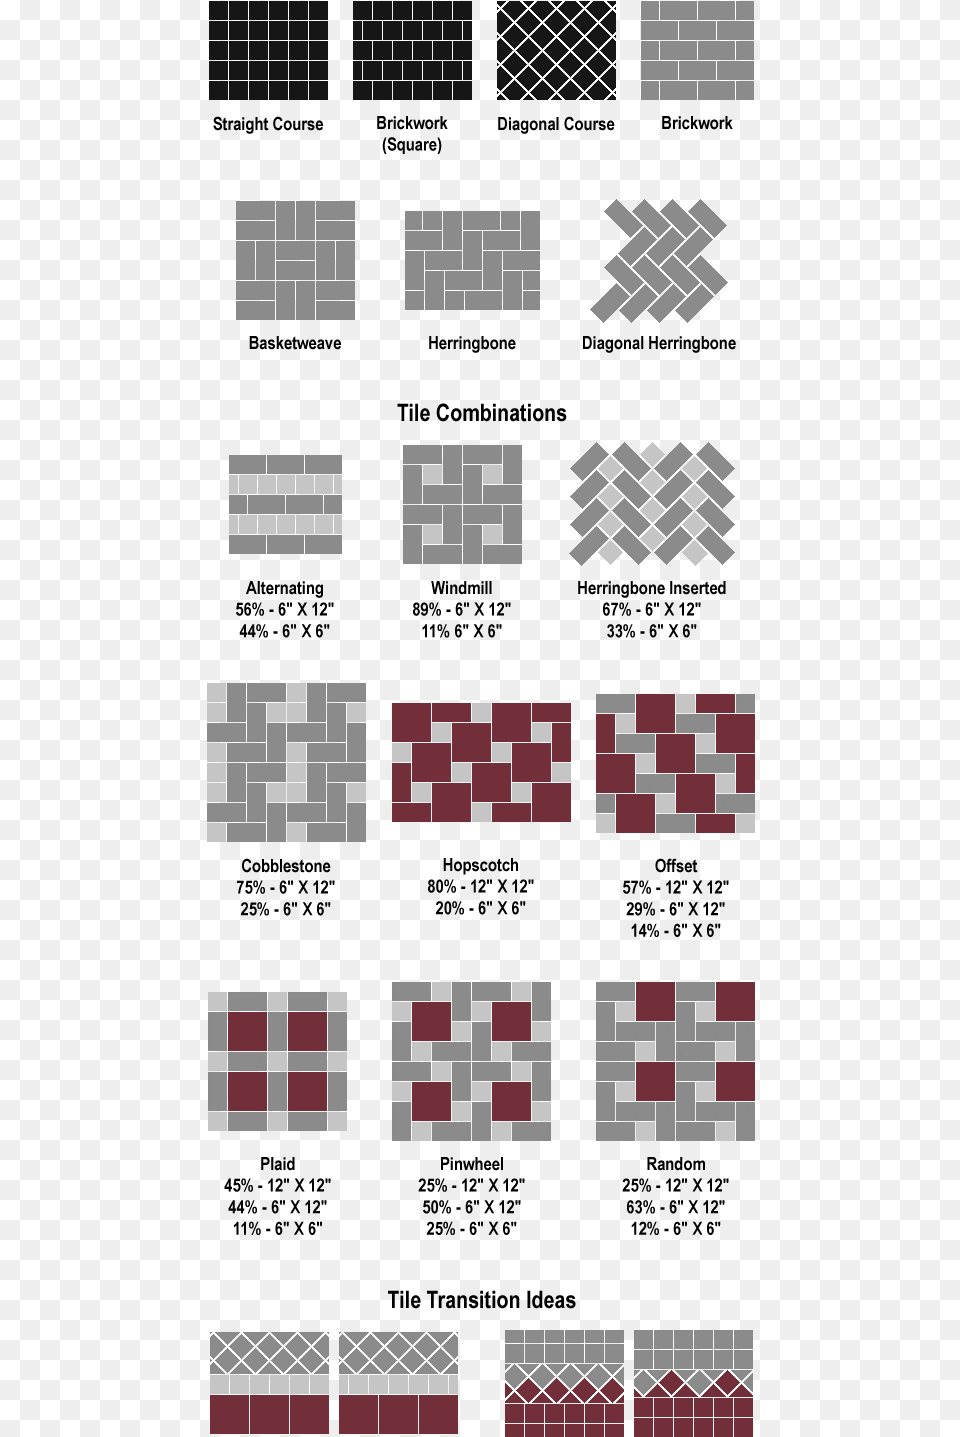 Different Ways To Lay Square Tiles, Scoreboard Png Image